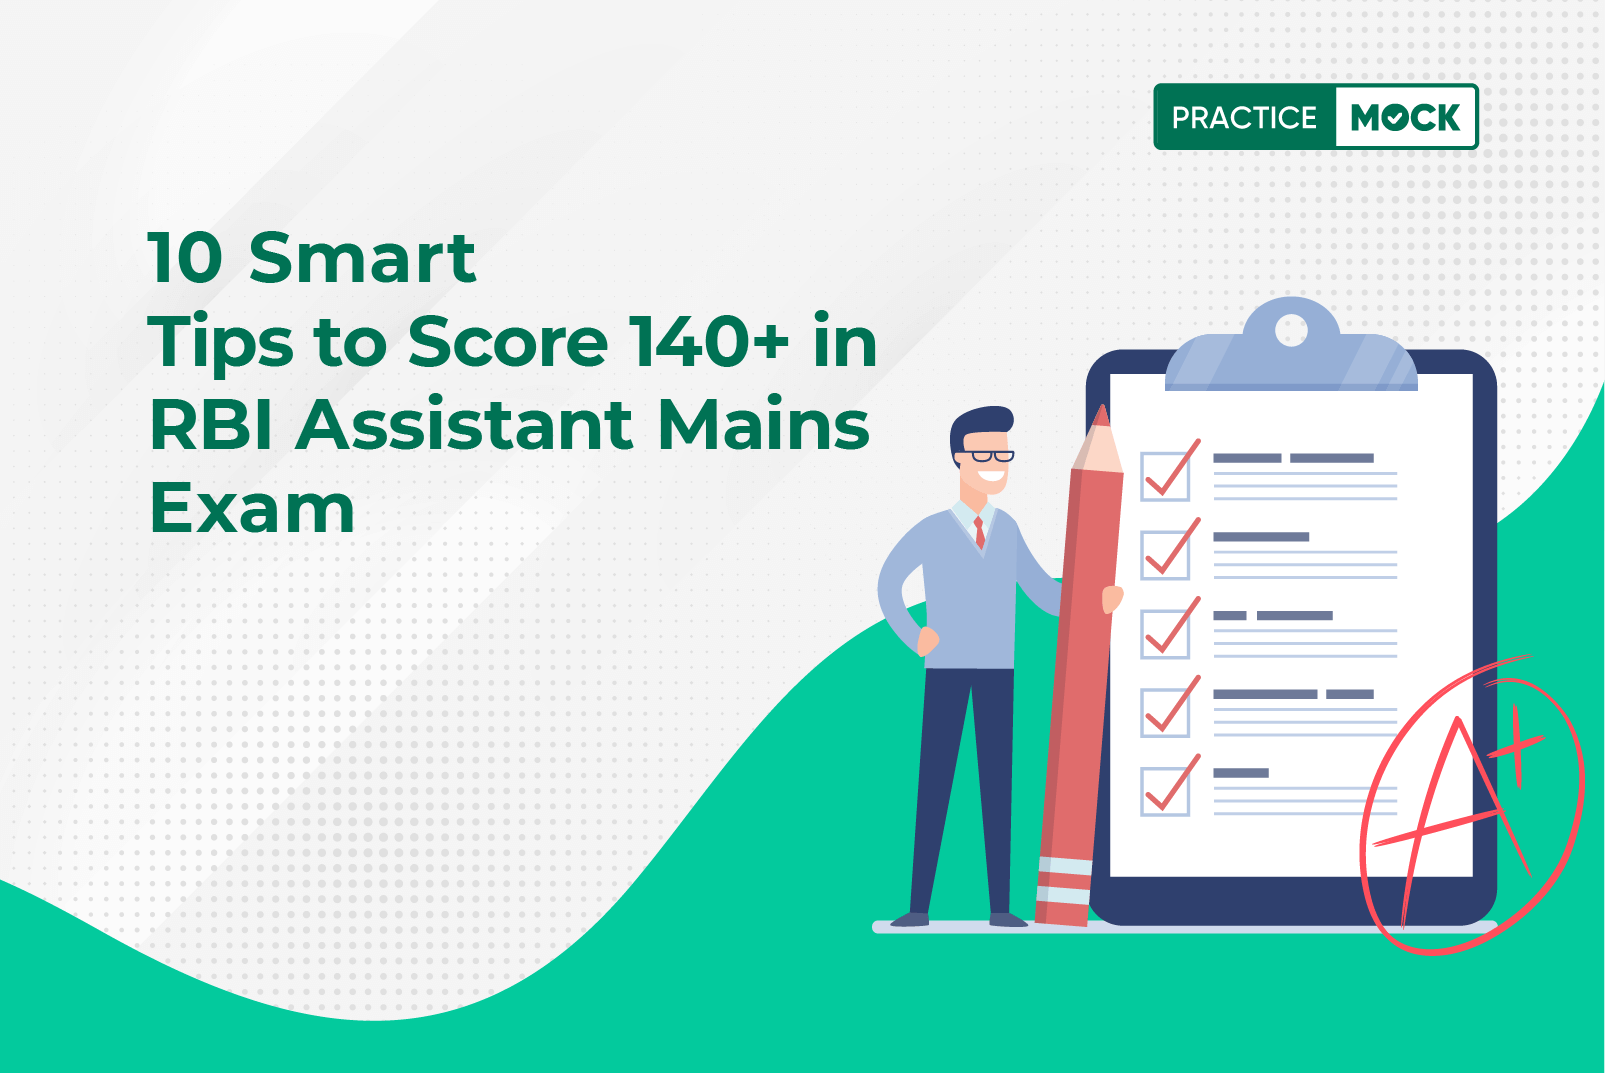 10 Smart Tips to Score 140+ in RBI Assistant Mains Exam